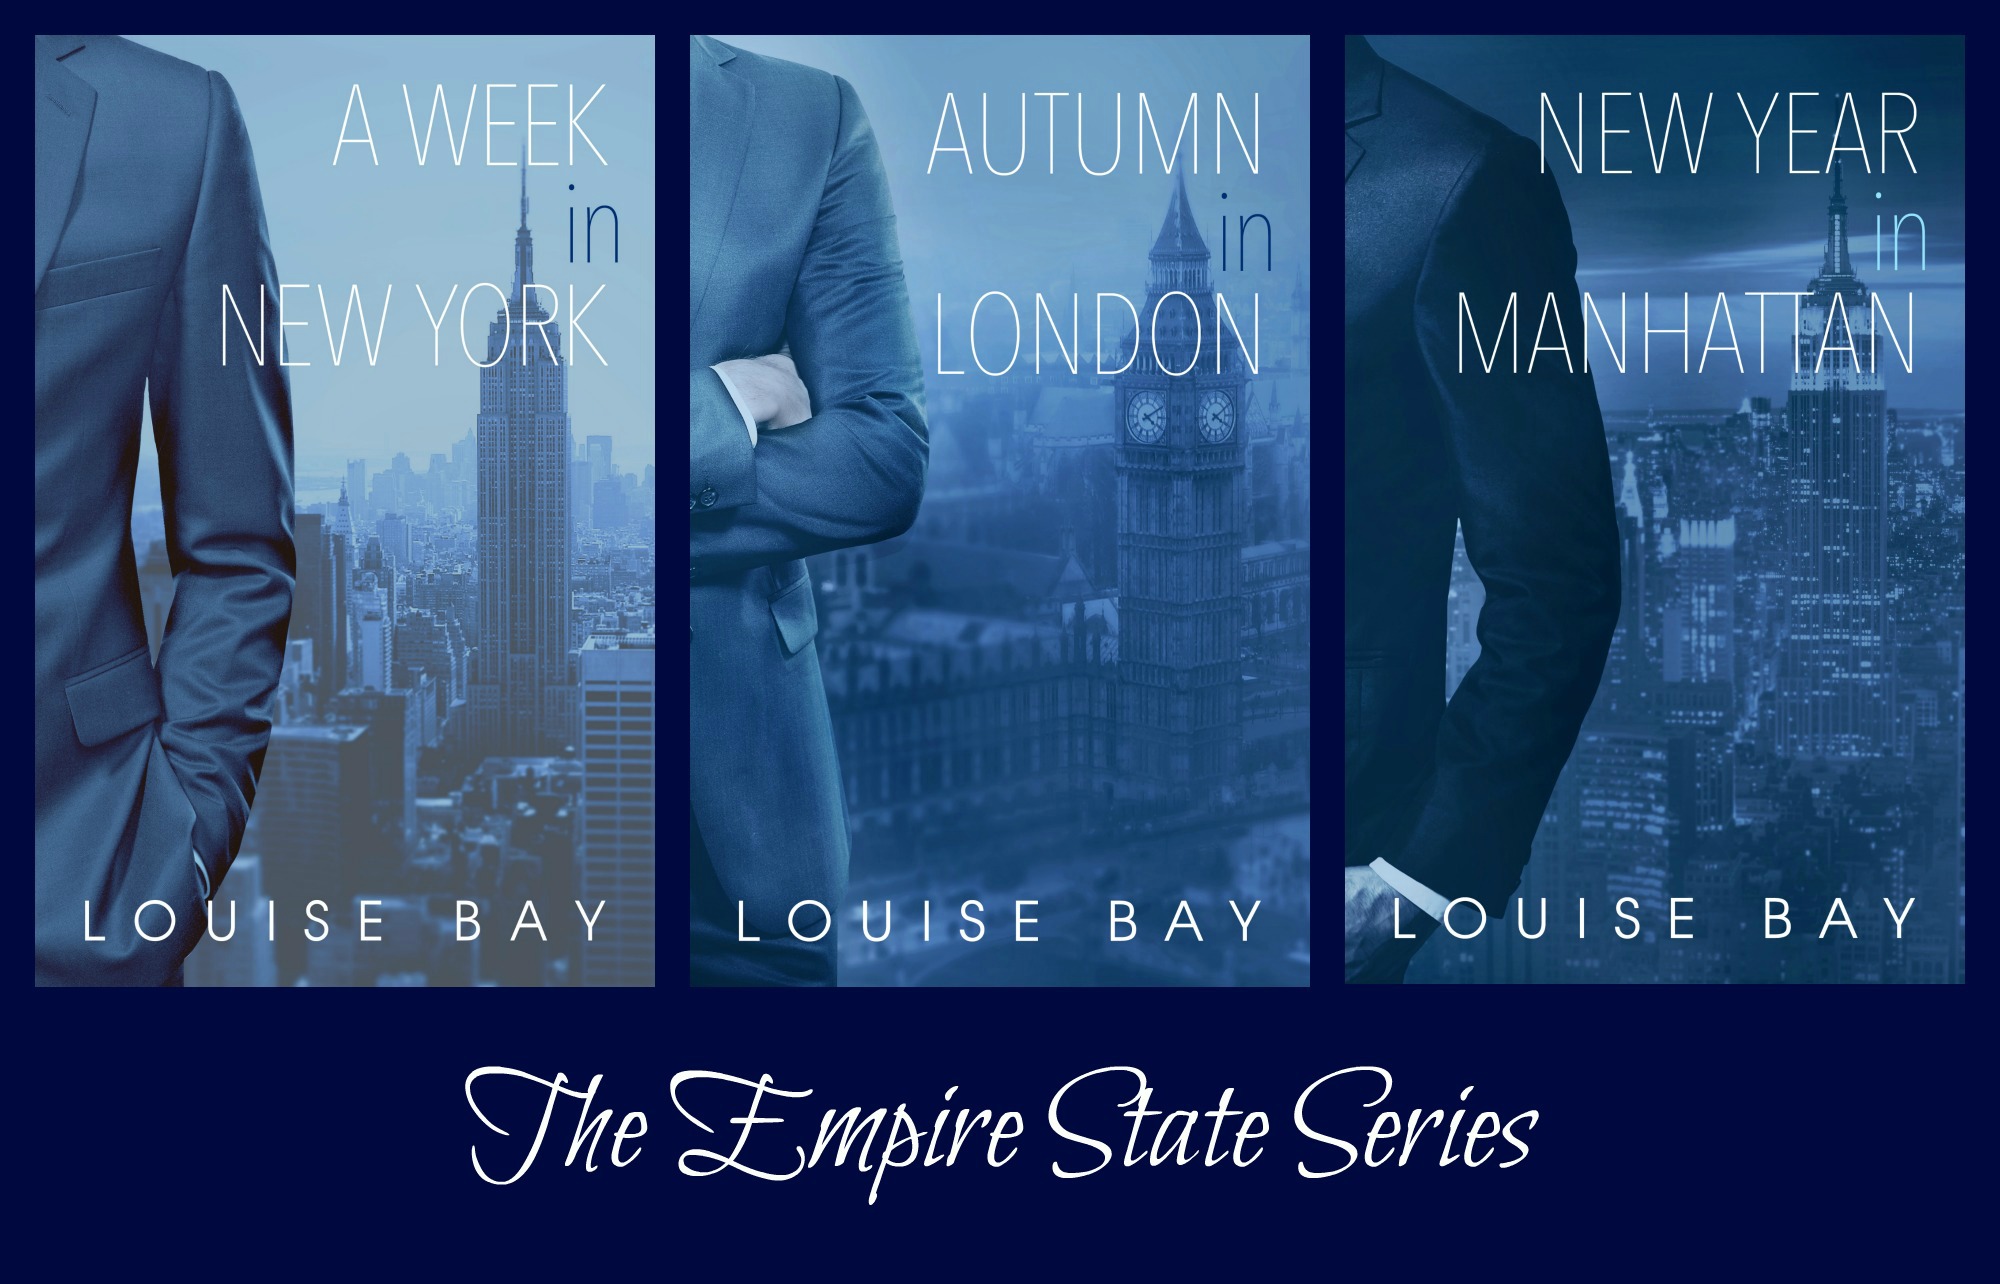 The Empire State Series: A Week in New York, Autumn in London, New